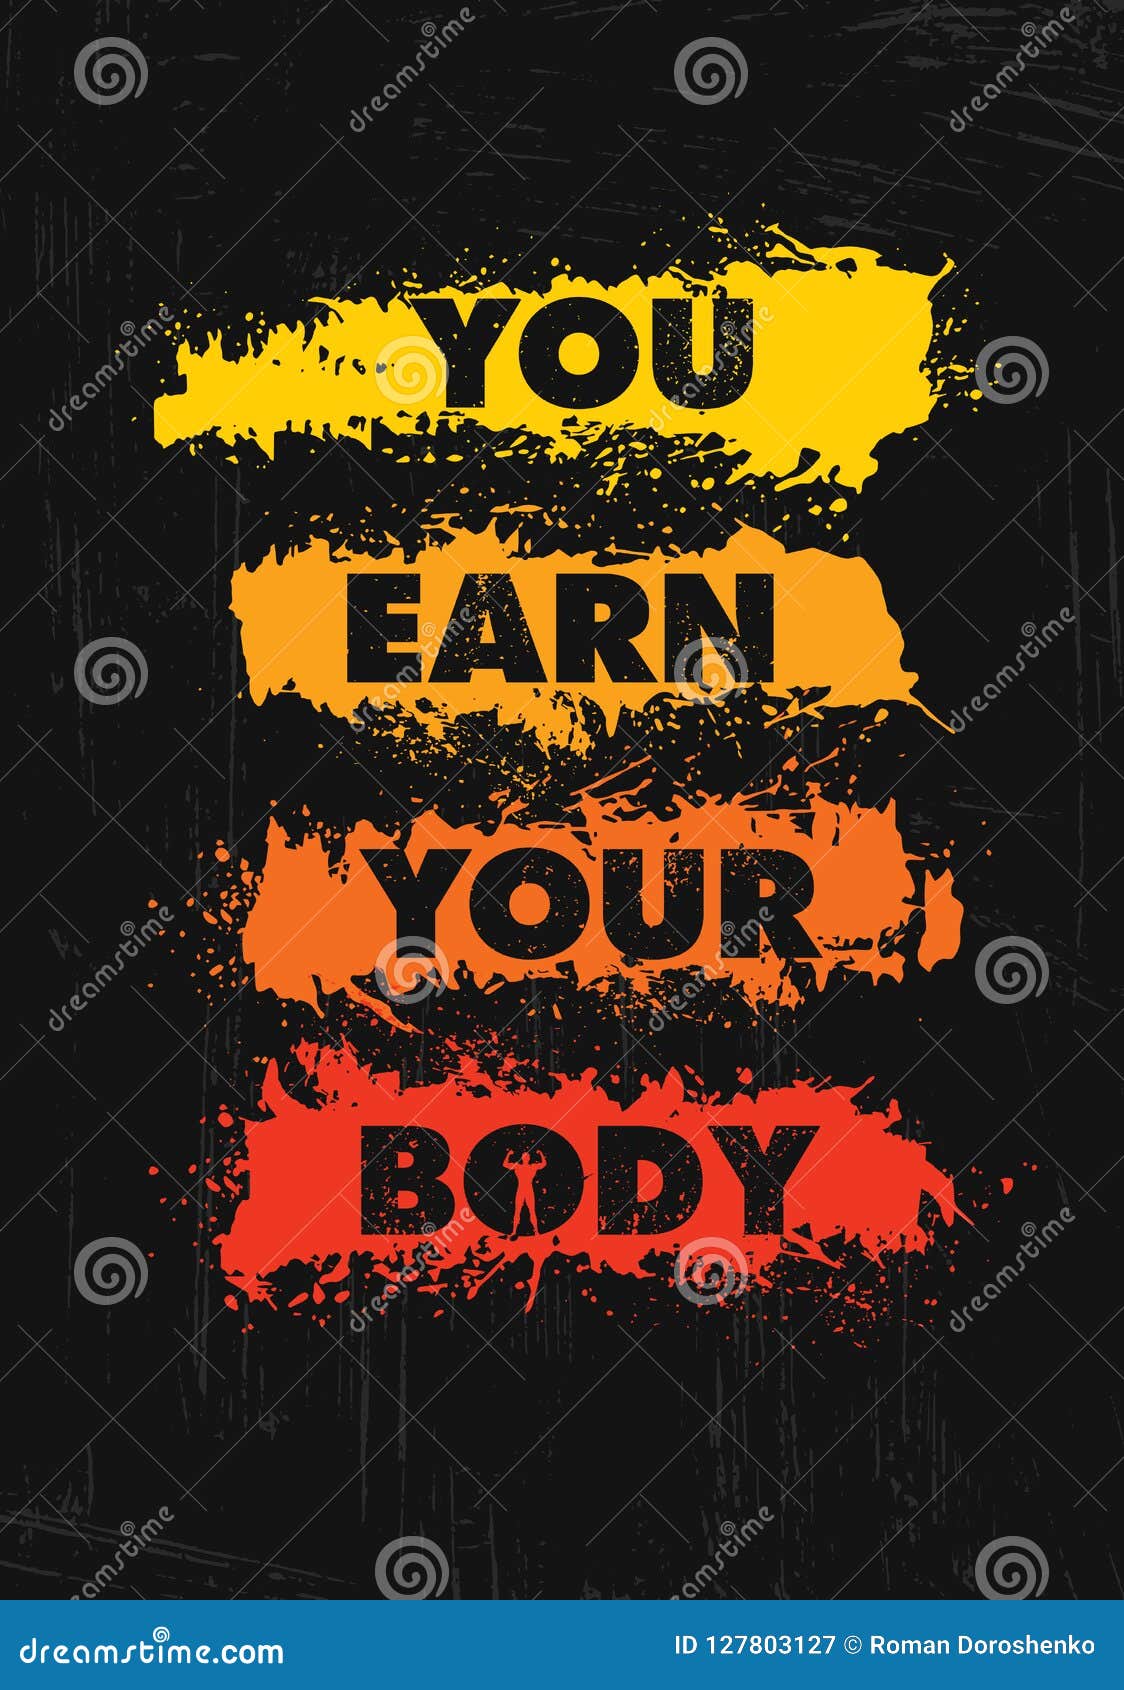 You Earn Your Body. Inspiring Workout and Fitness Gym Motivation Quote  Illustration Sign. Sport Vector Rough Stock Vector - Illustration of  background, athlete: 127803127